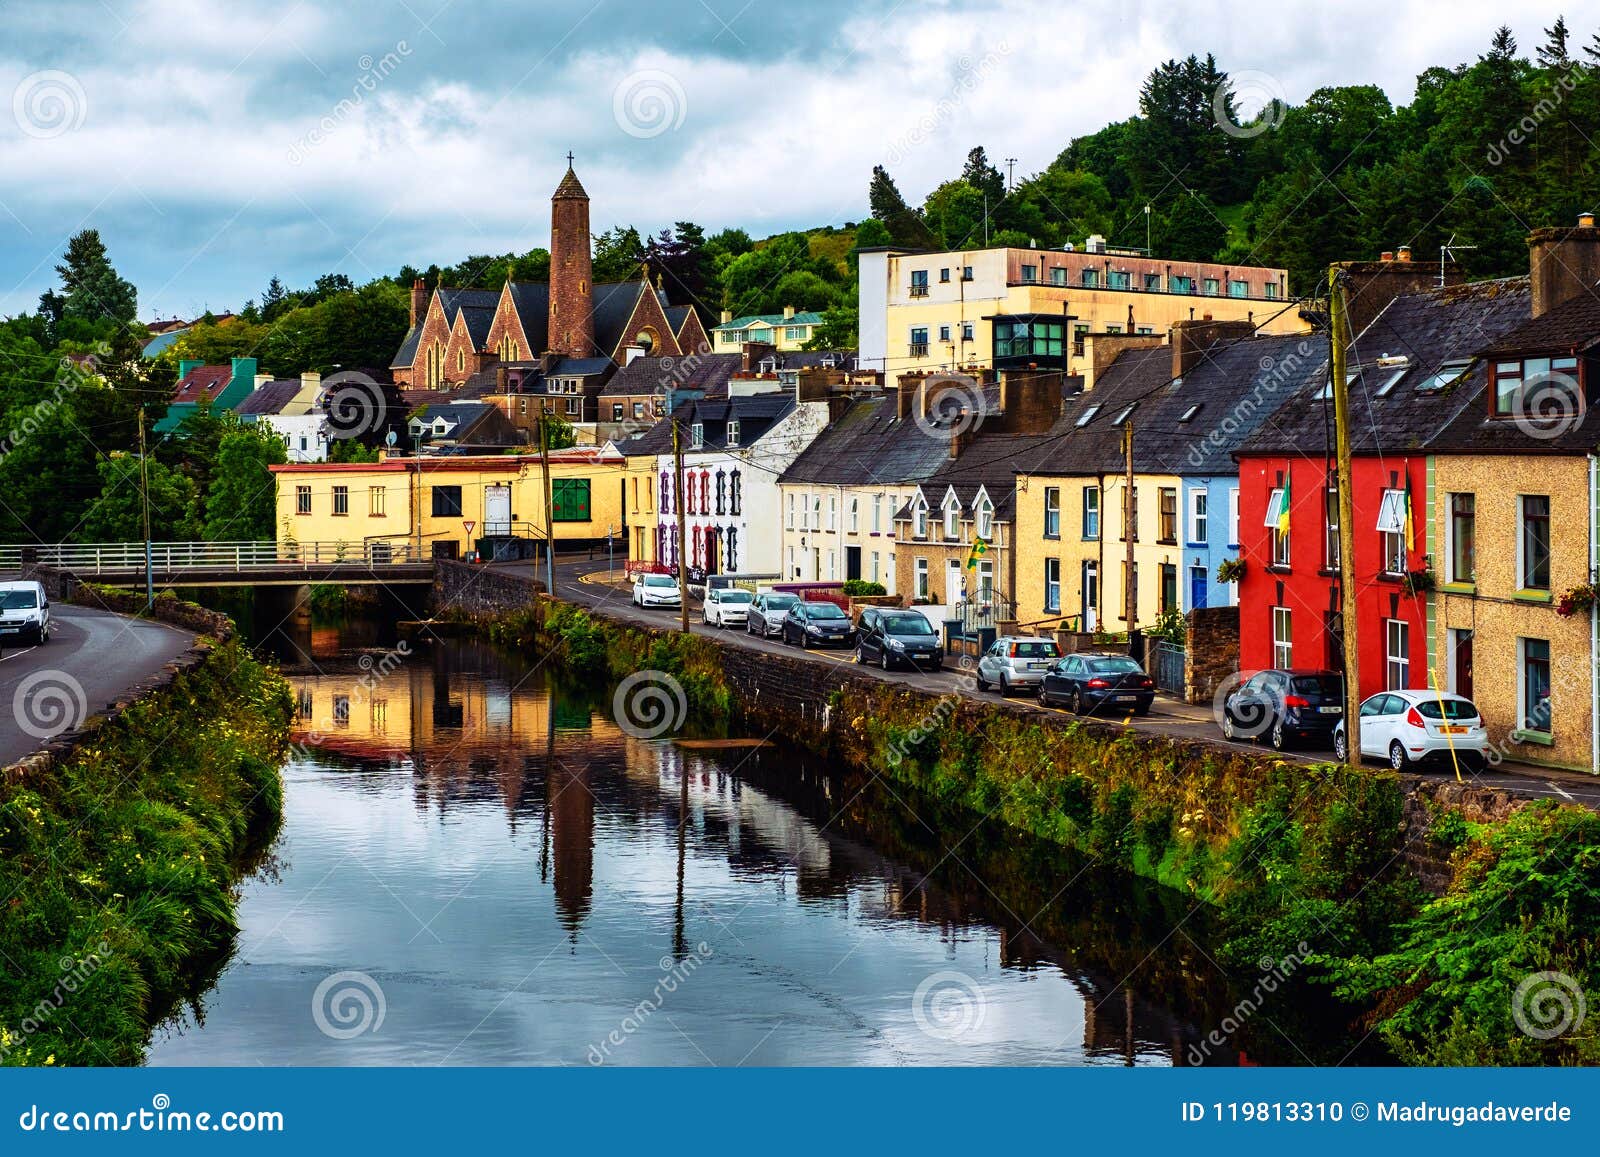 beautiful landscape in donegal, ireland with river and colorful houses